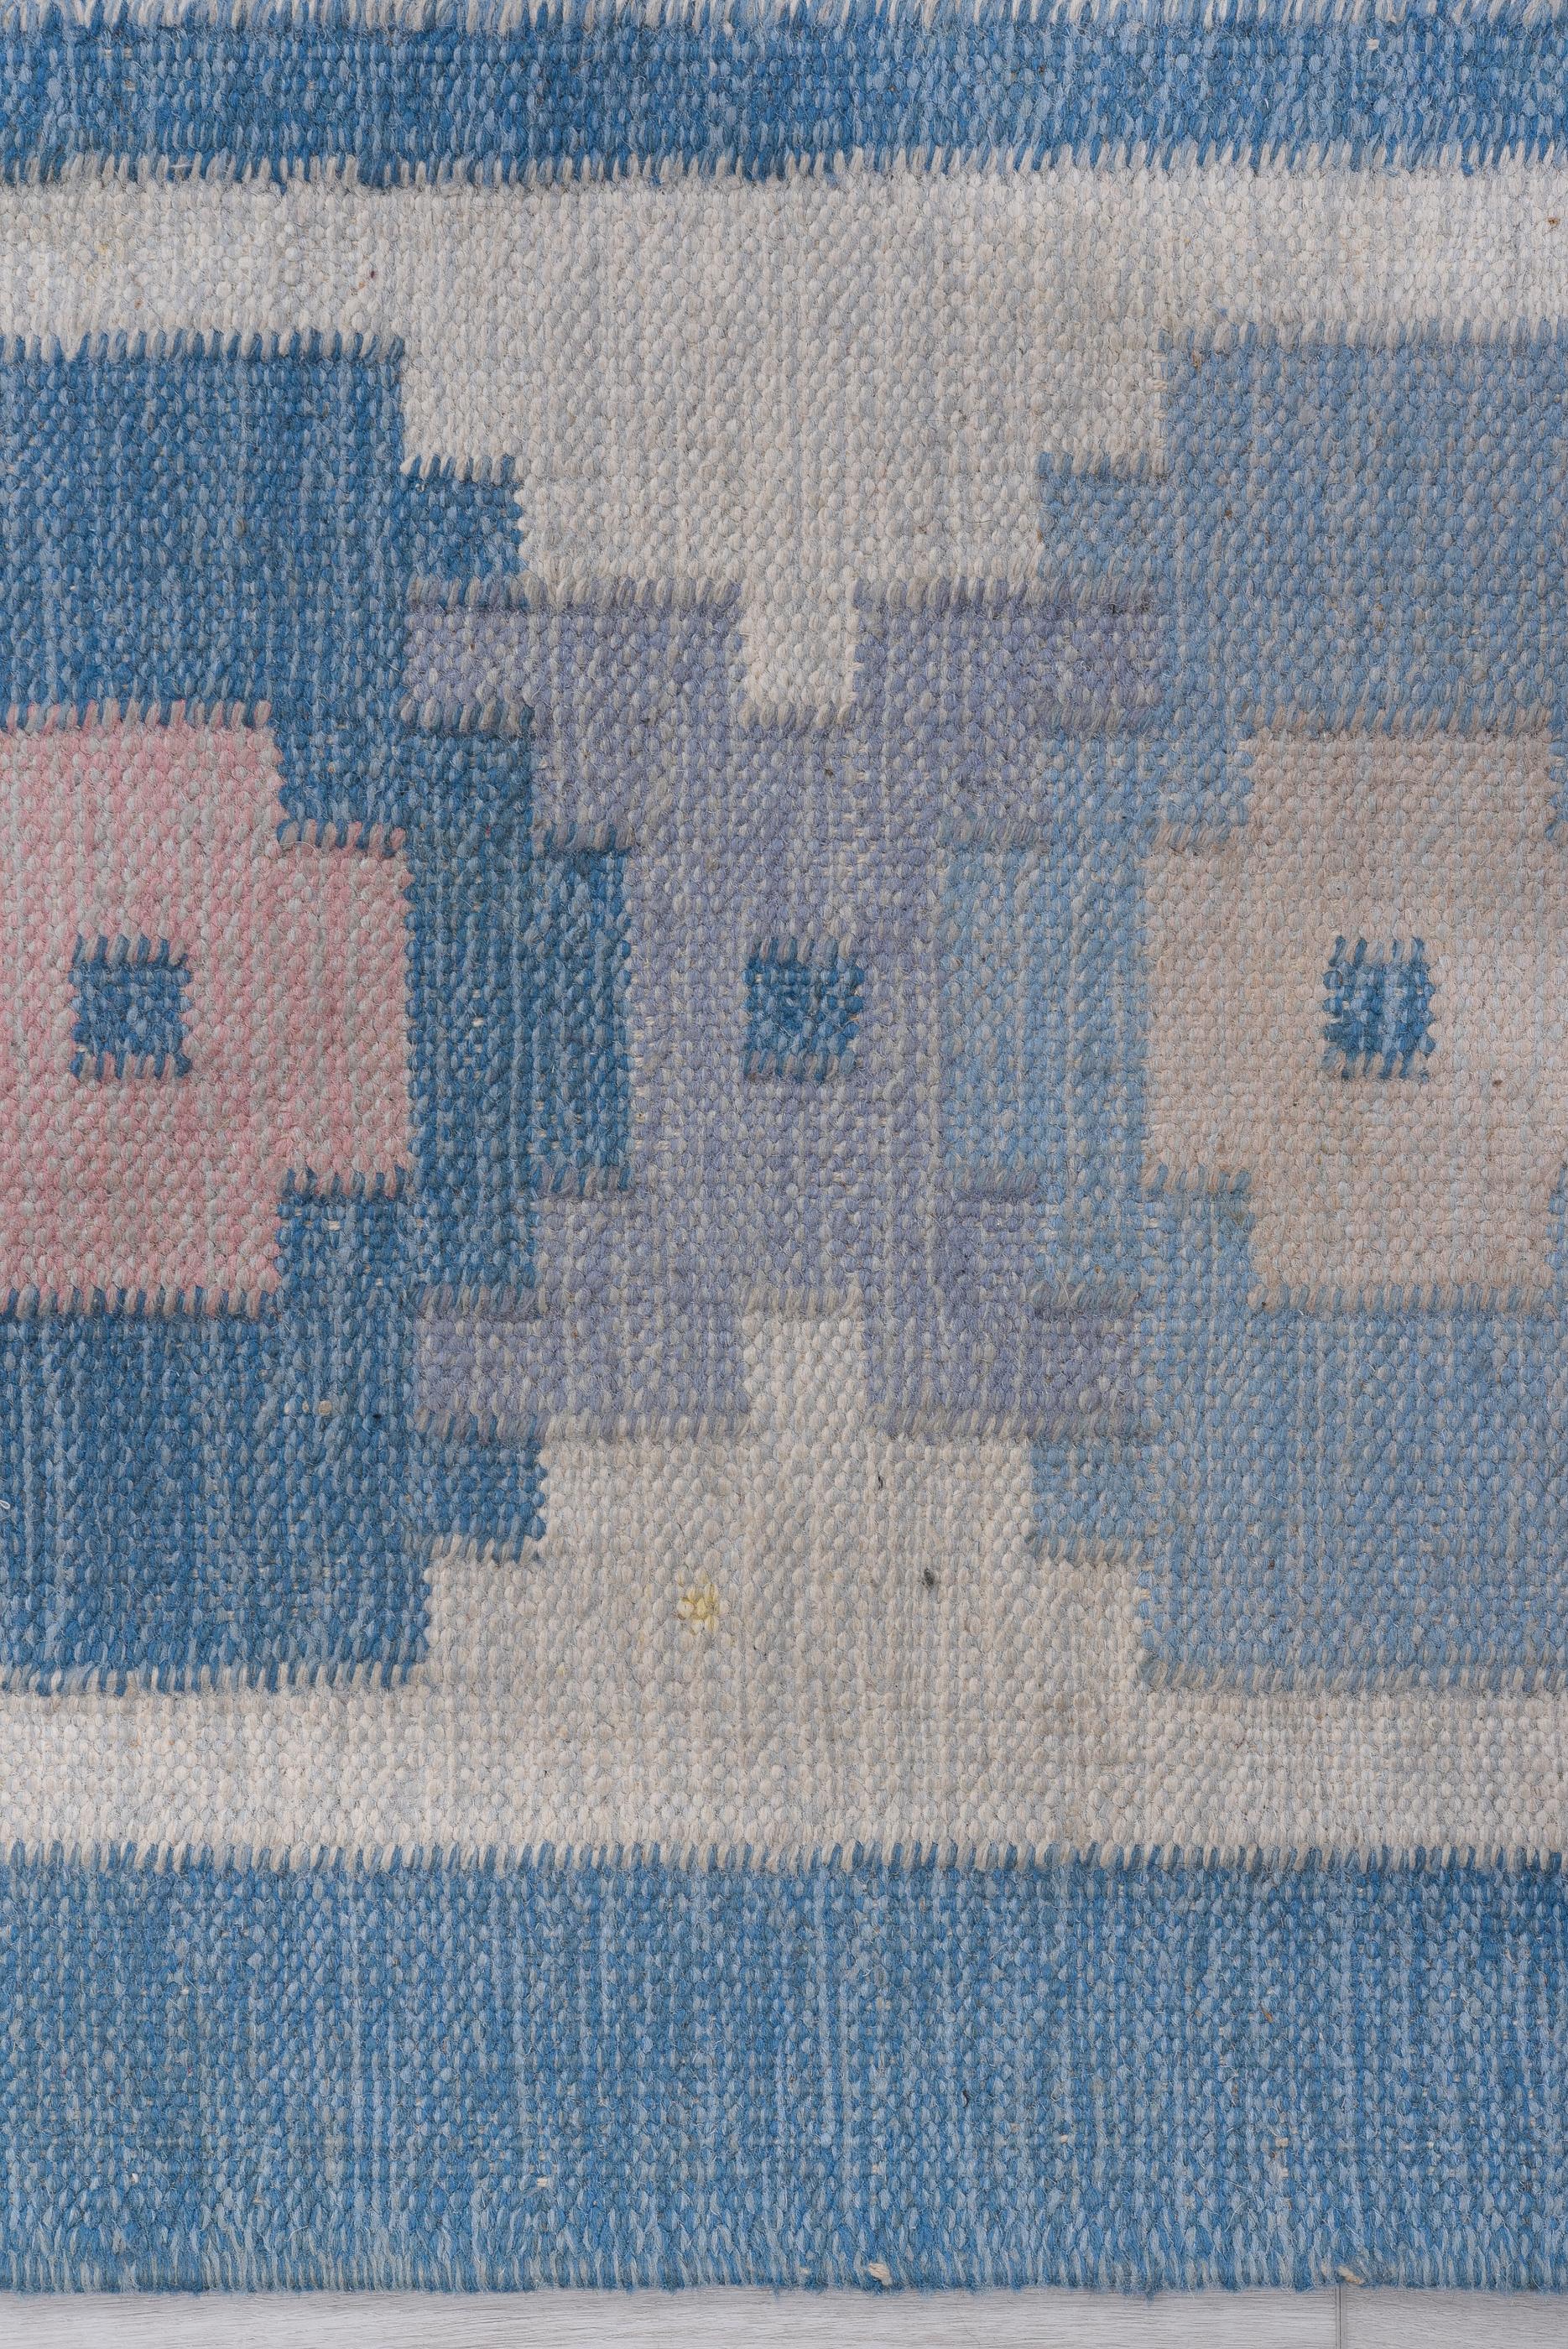 Eliko Rugs by David Ariel Vintage Swedish Rollakan Rug, Blue and Pink Tones In Excellent Condition For Sale In New York, NY